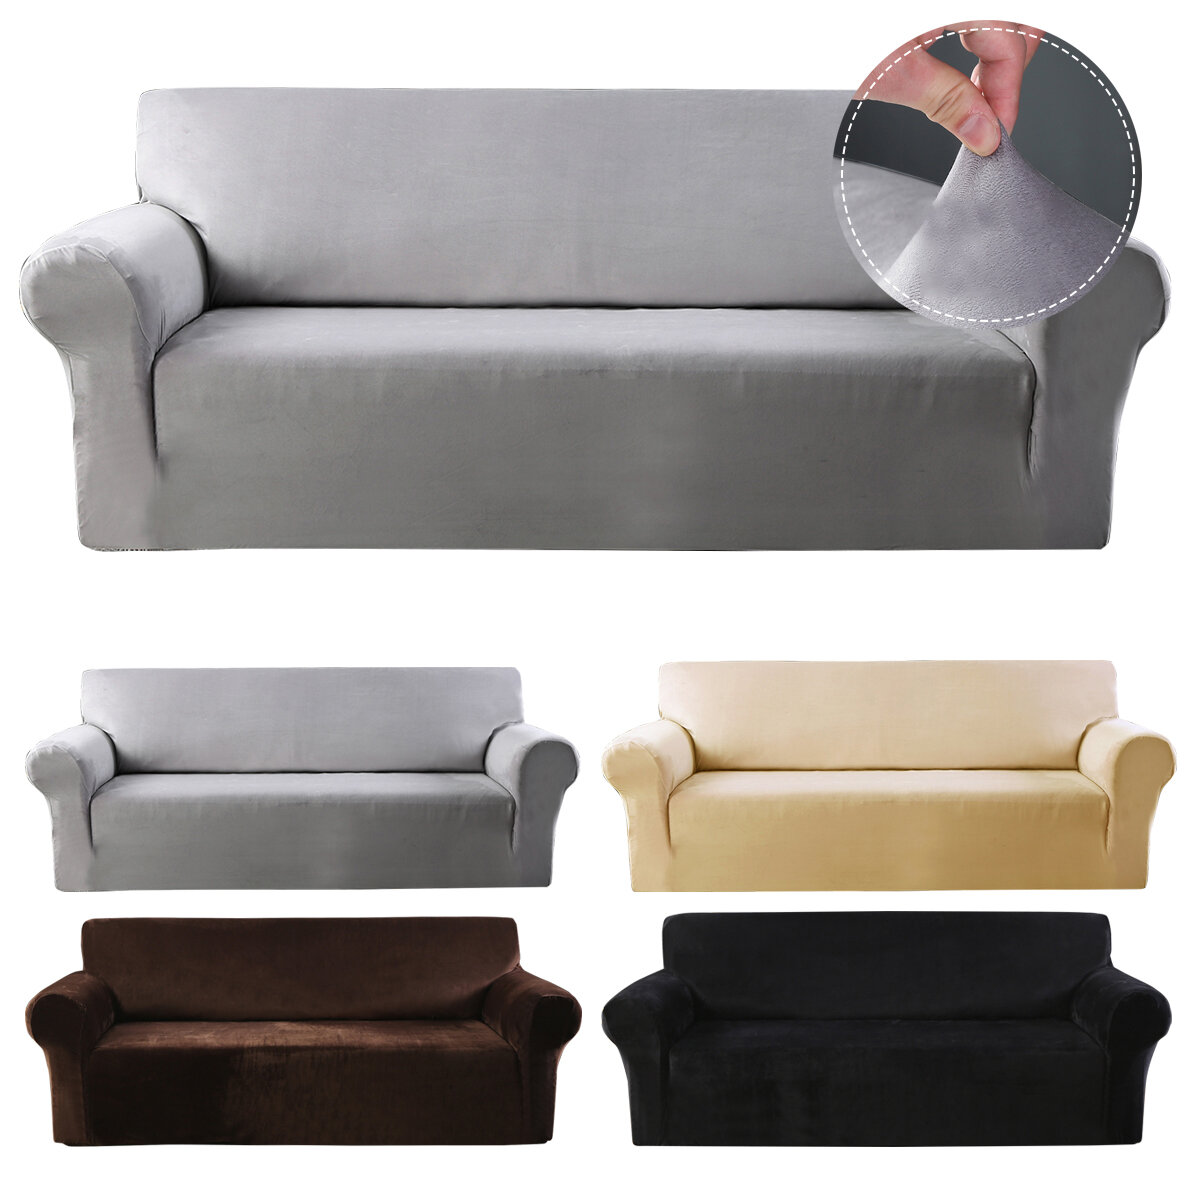 1/2/3/4 Seaters Elastic Velvet Sofa Cover Universal Chair Seat Protector Stretch Slipcover Couch Case Home Office Furnit